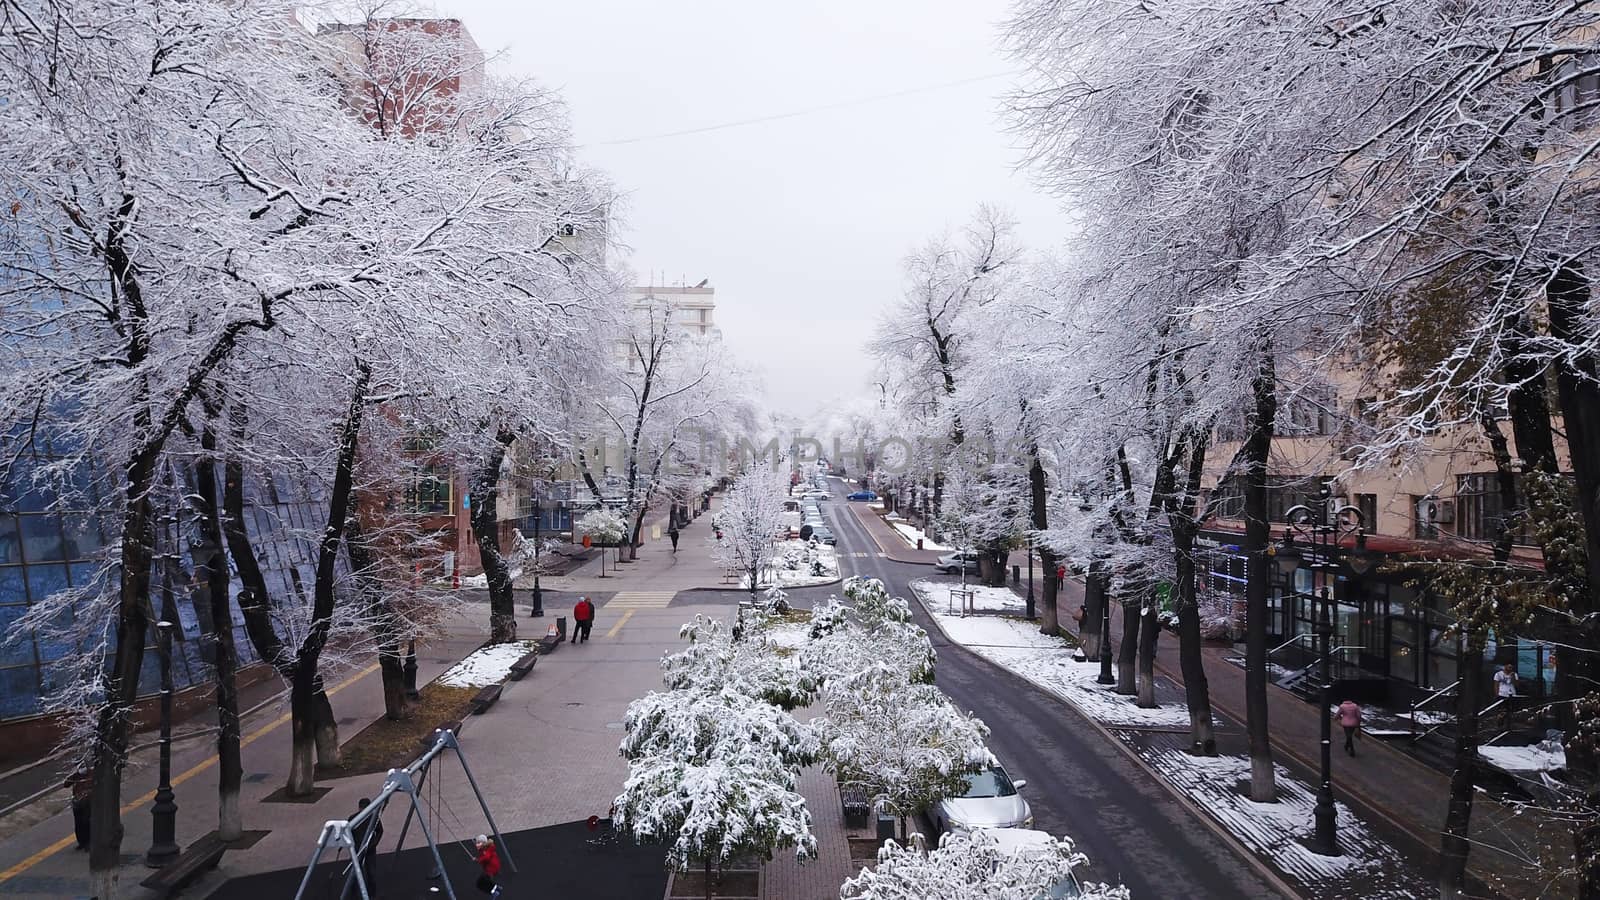 Trees covered with snow, urban environment. Street for walking, people go about their business, cars pass on the road, children ride on a swing. Snow-white trees, Christmas mood. Almaty, Kazakhstan.